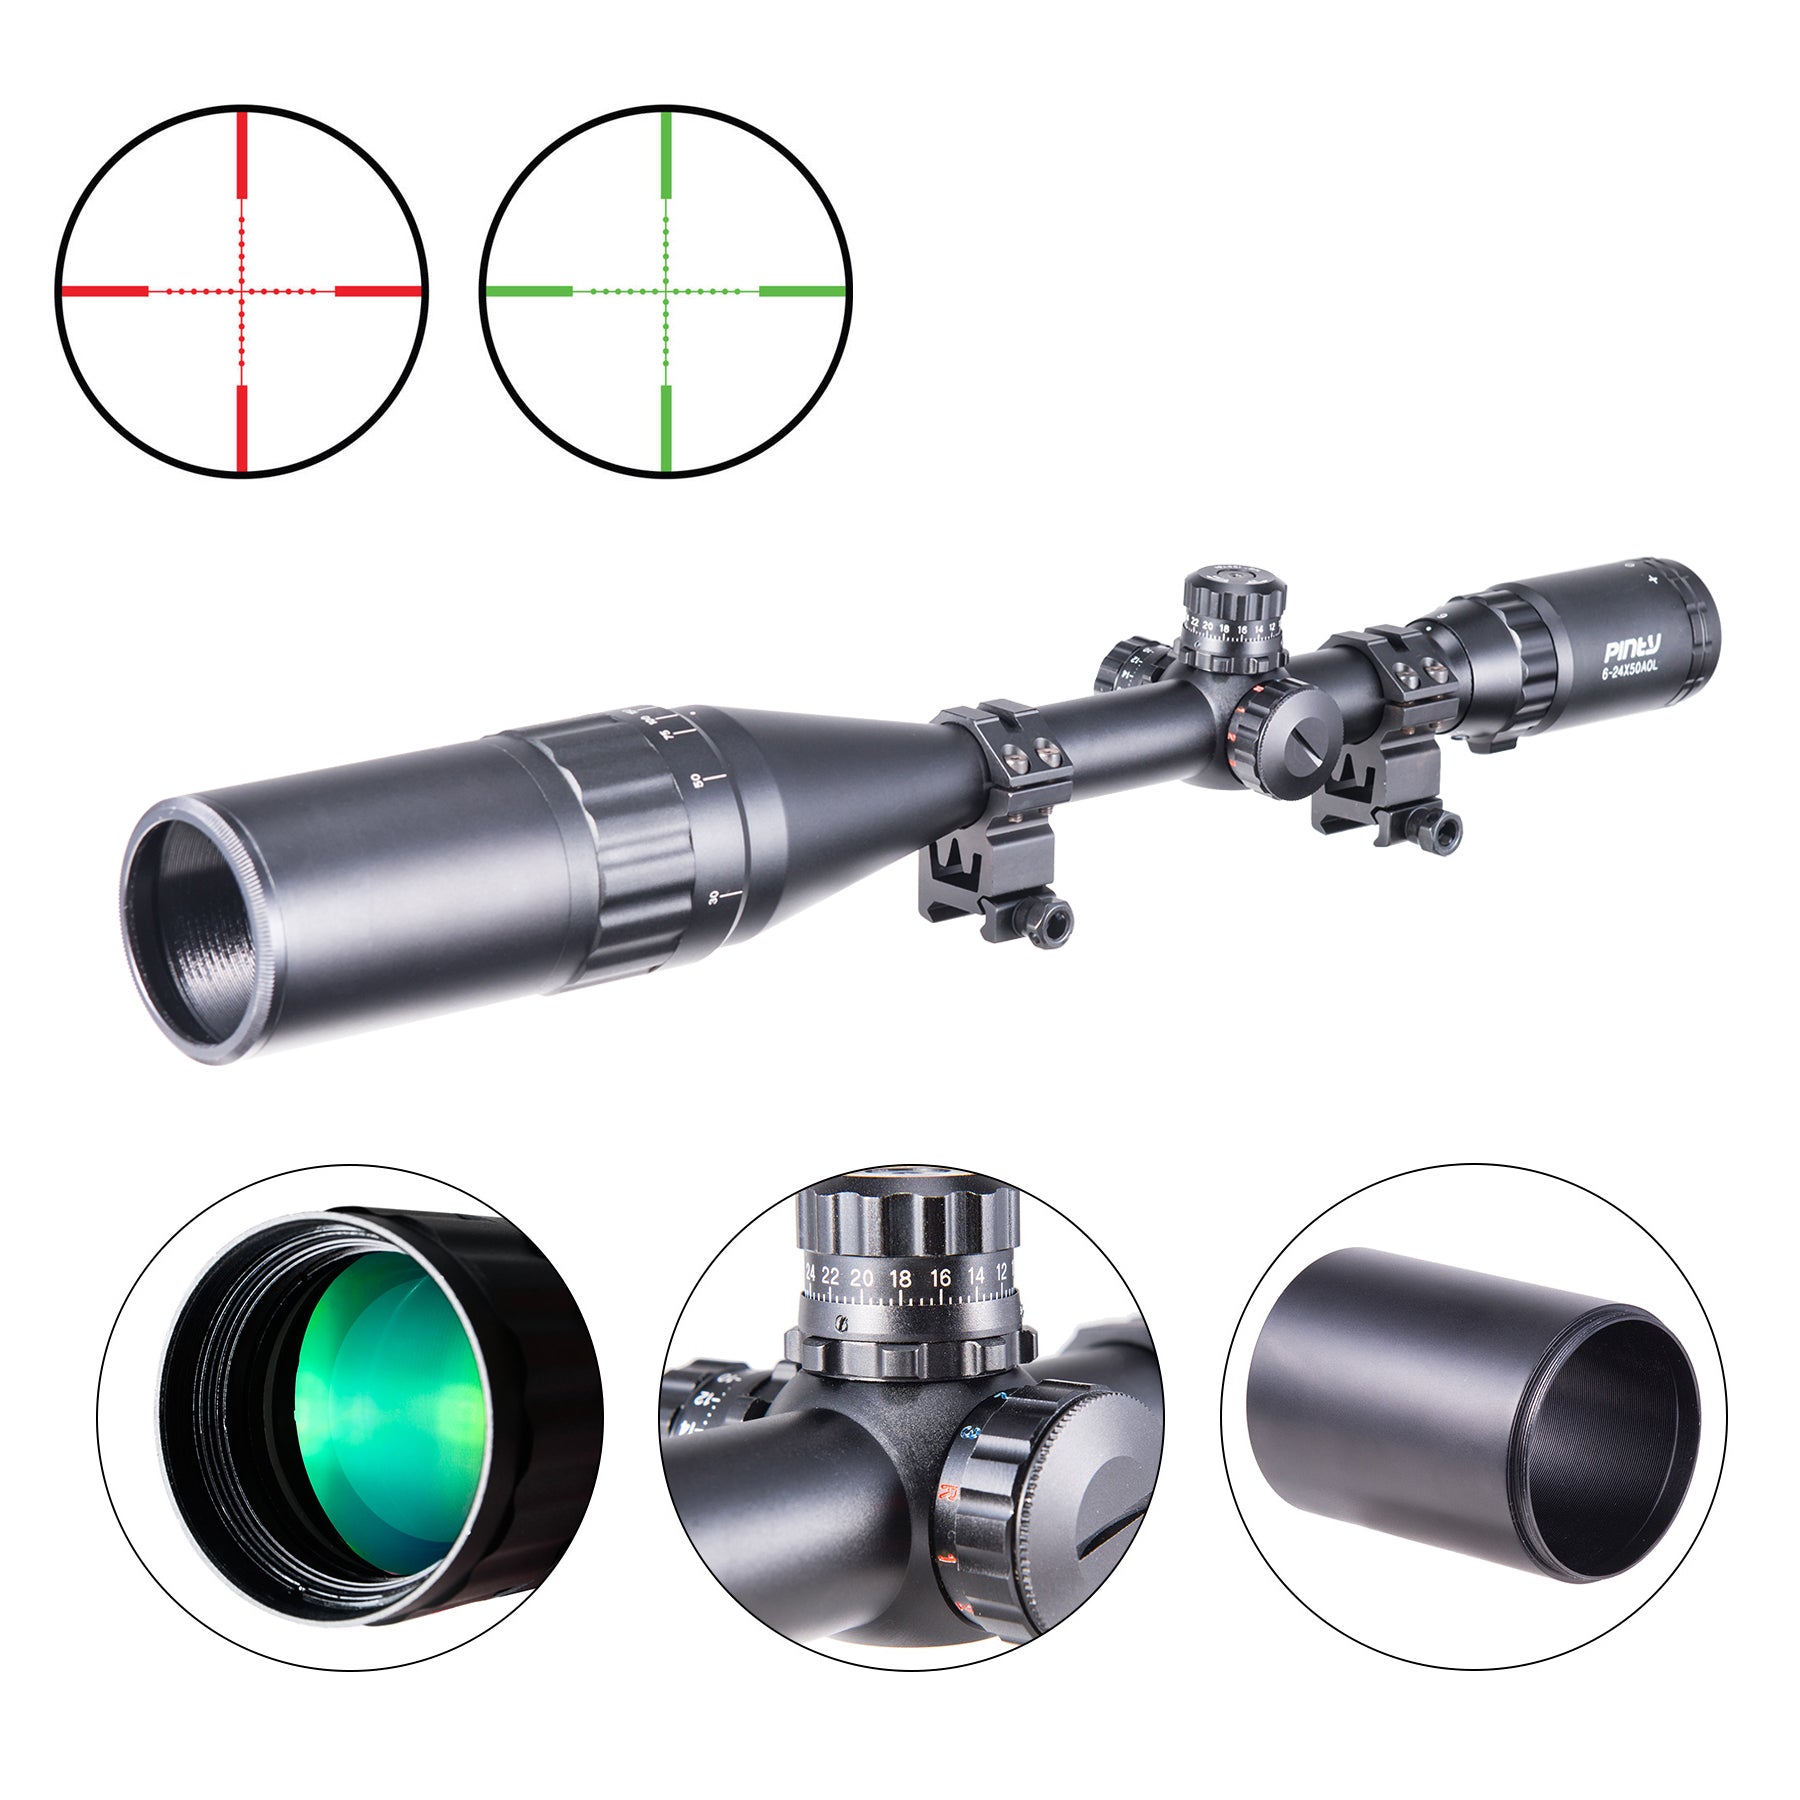 【BUY 1 GET 2 FREE】6-24x50 AO illuminated mil dot riflescope with sunshade tube, flip-up cap and ring mount high-profile picatinny rings